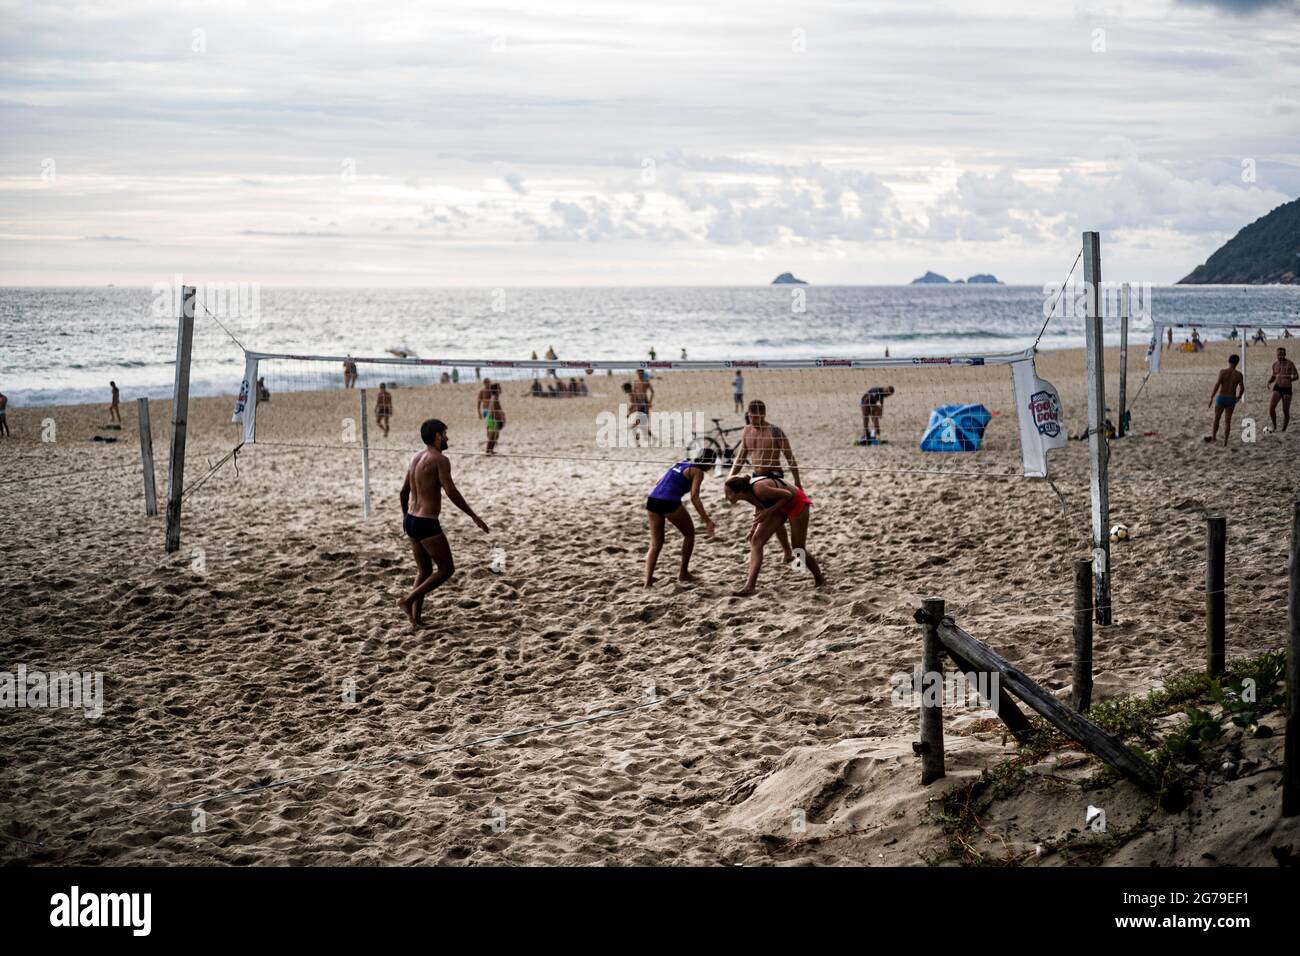 Young Brazilias play a game of futevôlei (footvolley), a sport that combines football/soccer and volleyball, on the beach in Leblon. Rio de Janeiro, Brazil Stock Photo